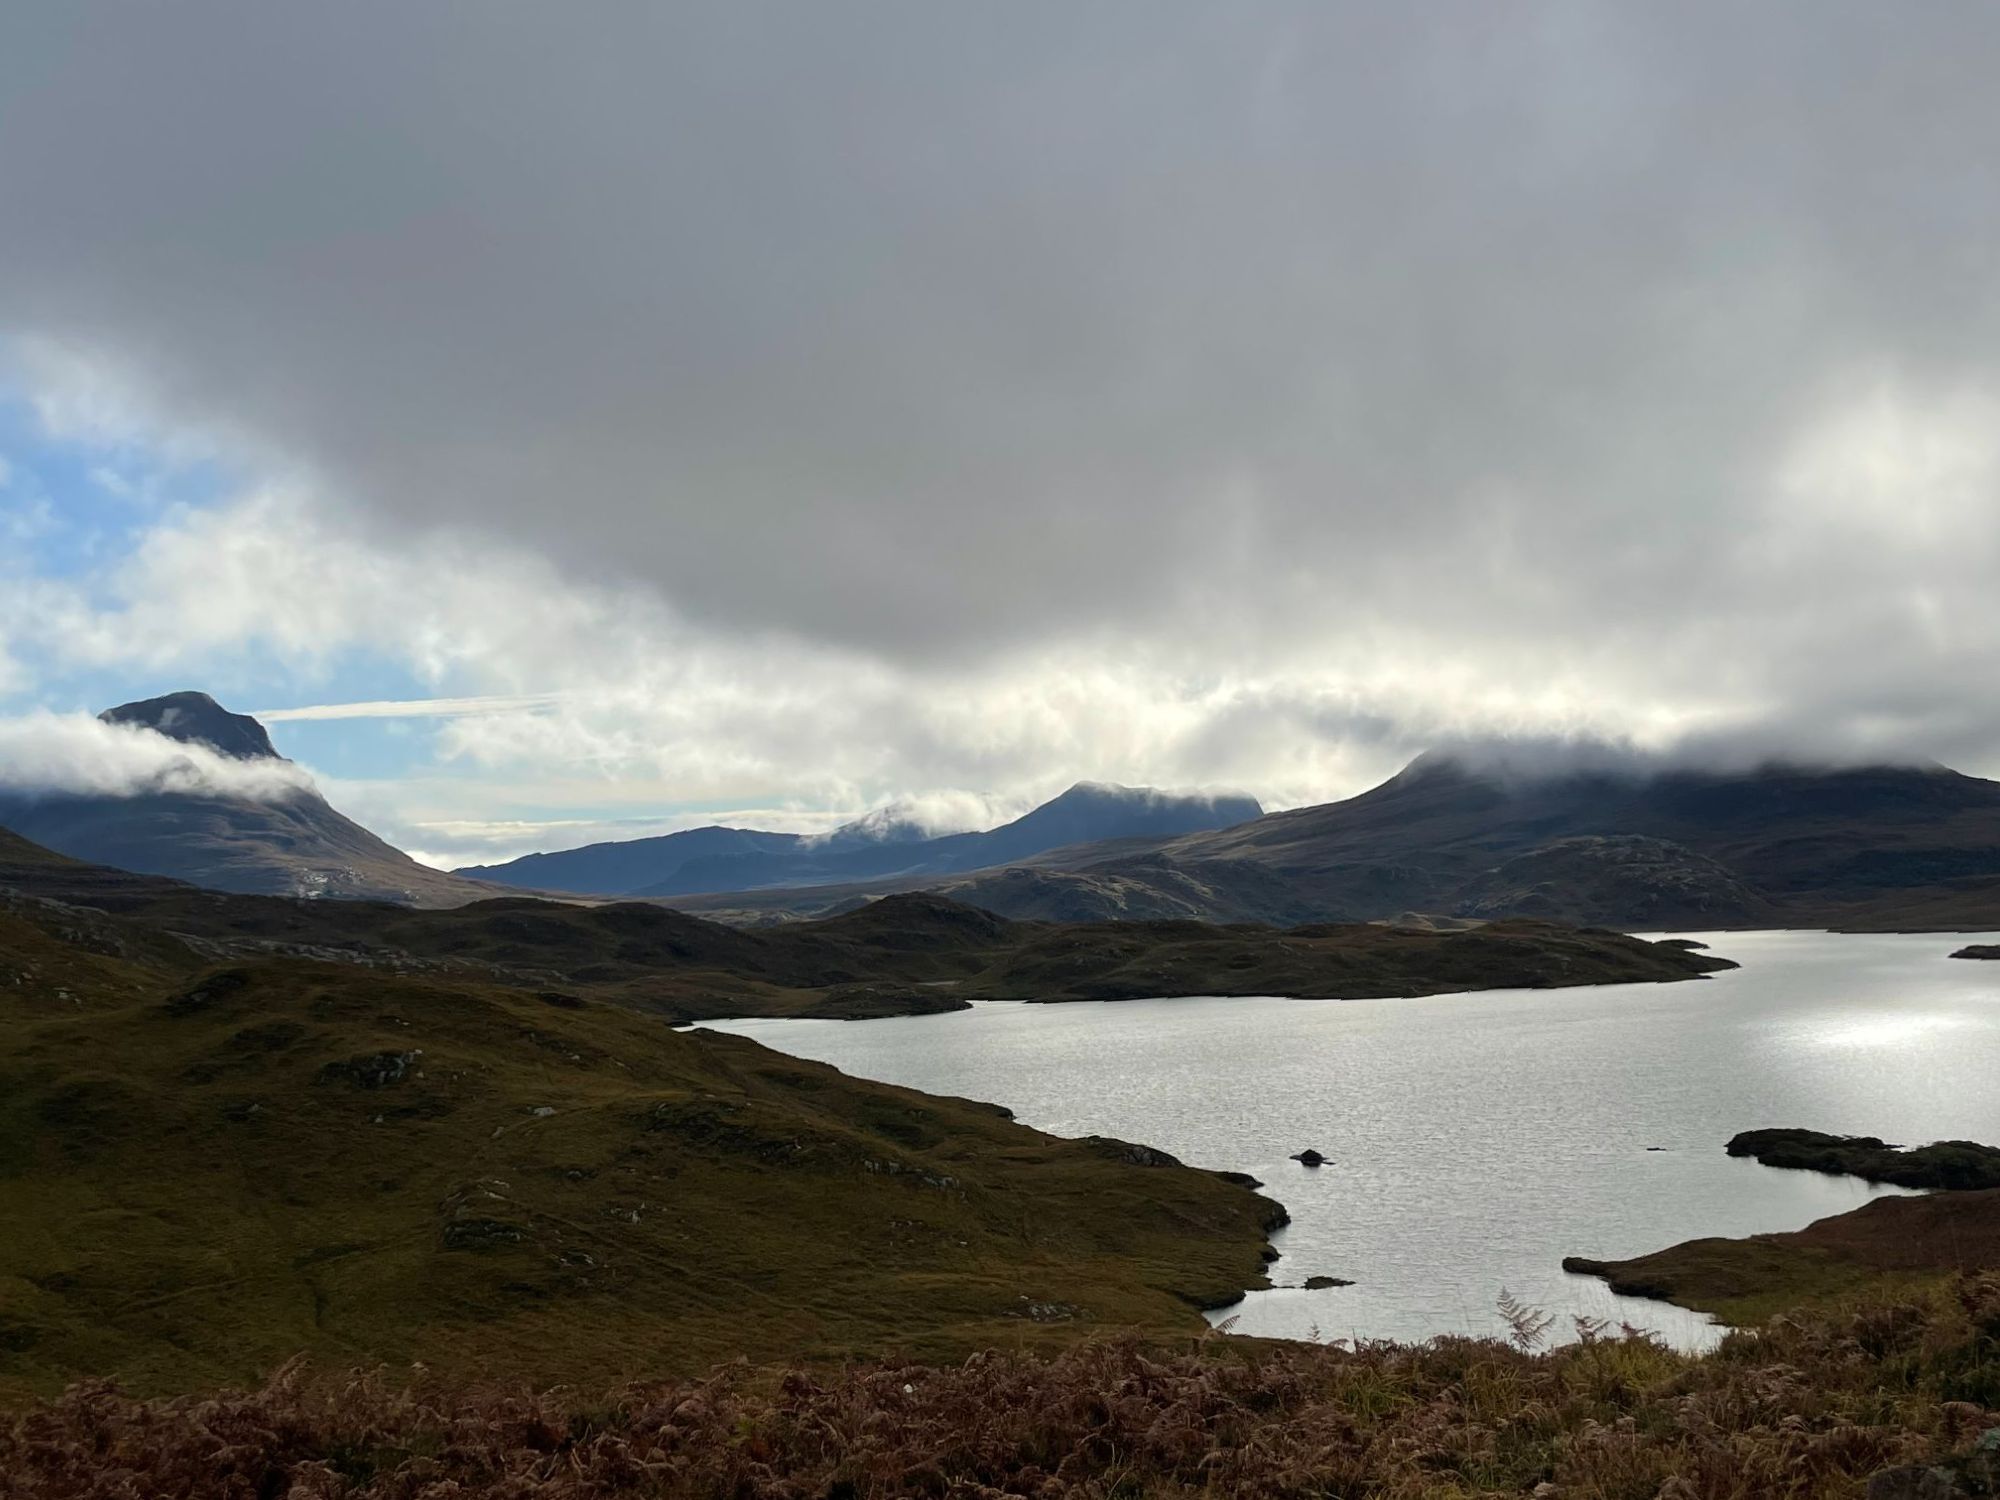 Cul Beag and Stac Pollaidh from north side of Sionascaig